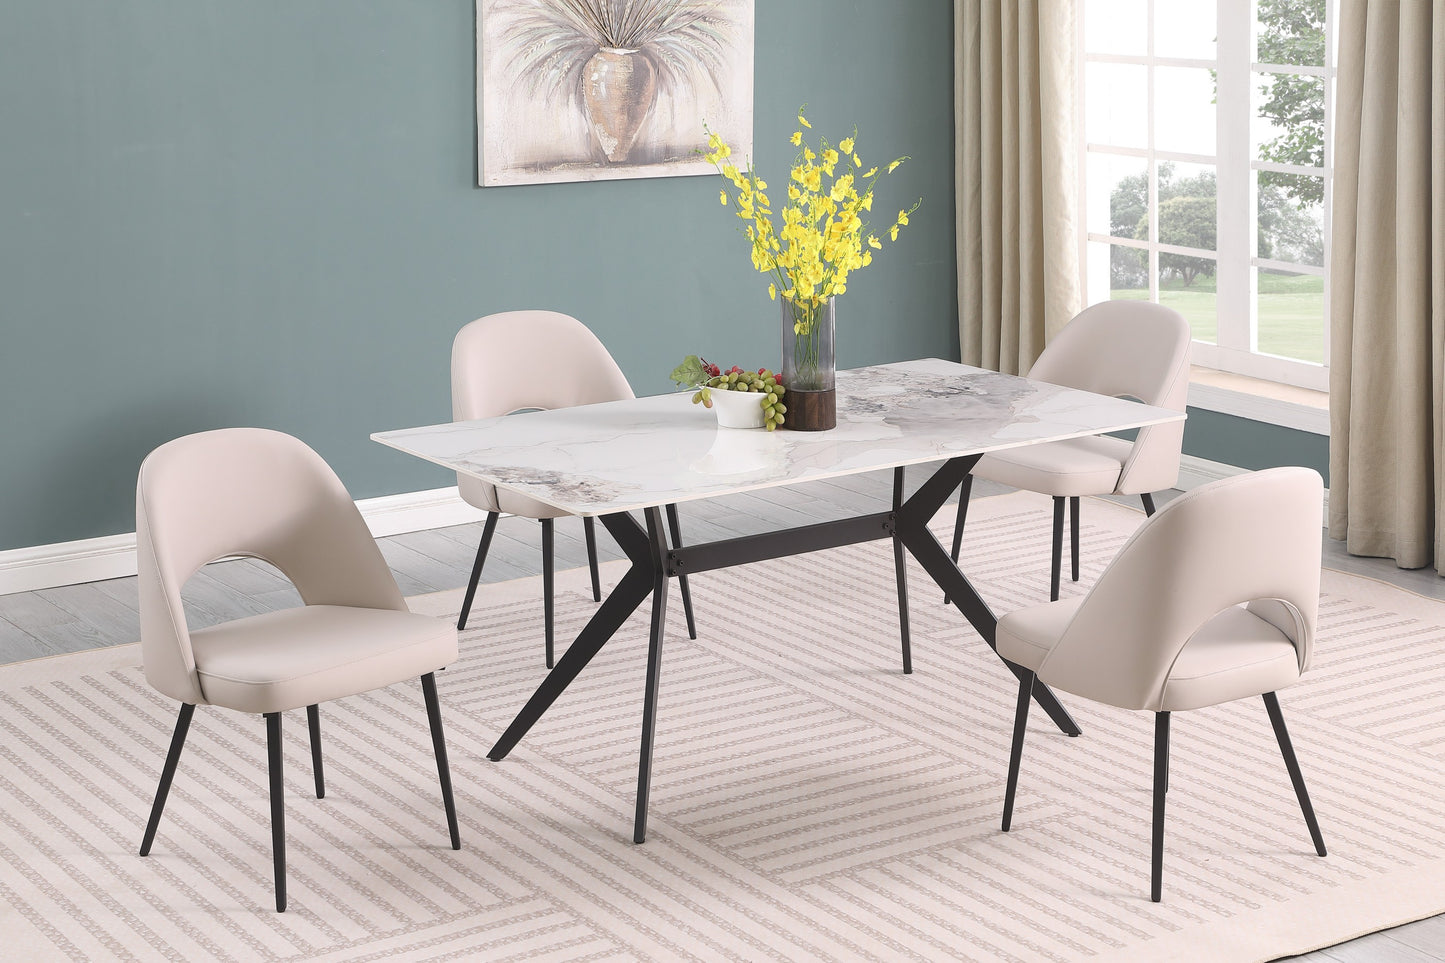 Hampshire 5 Piece Dining Set with Taupe Chairs